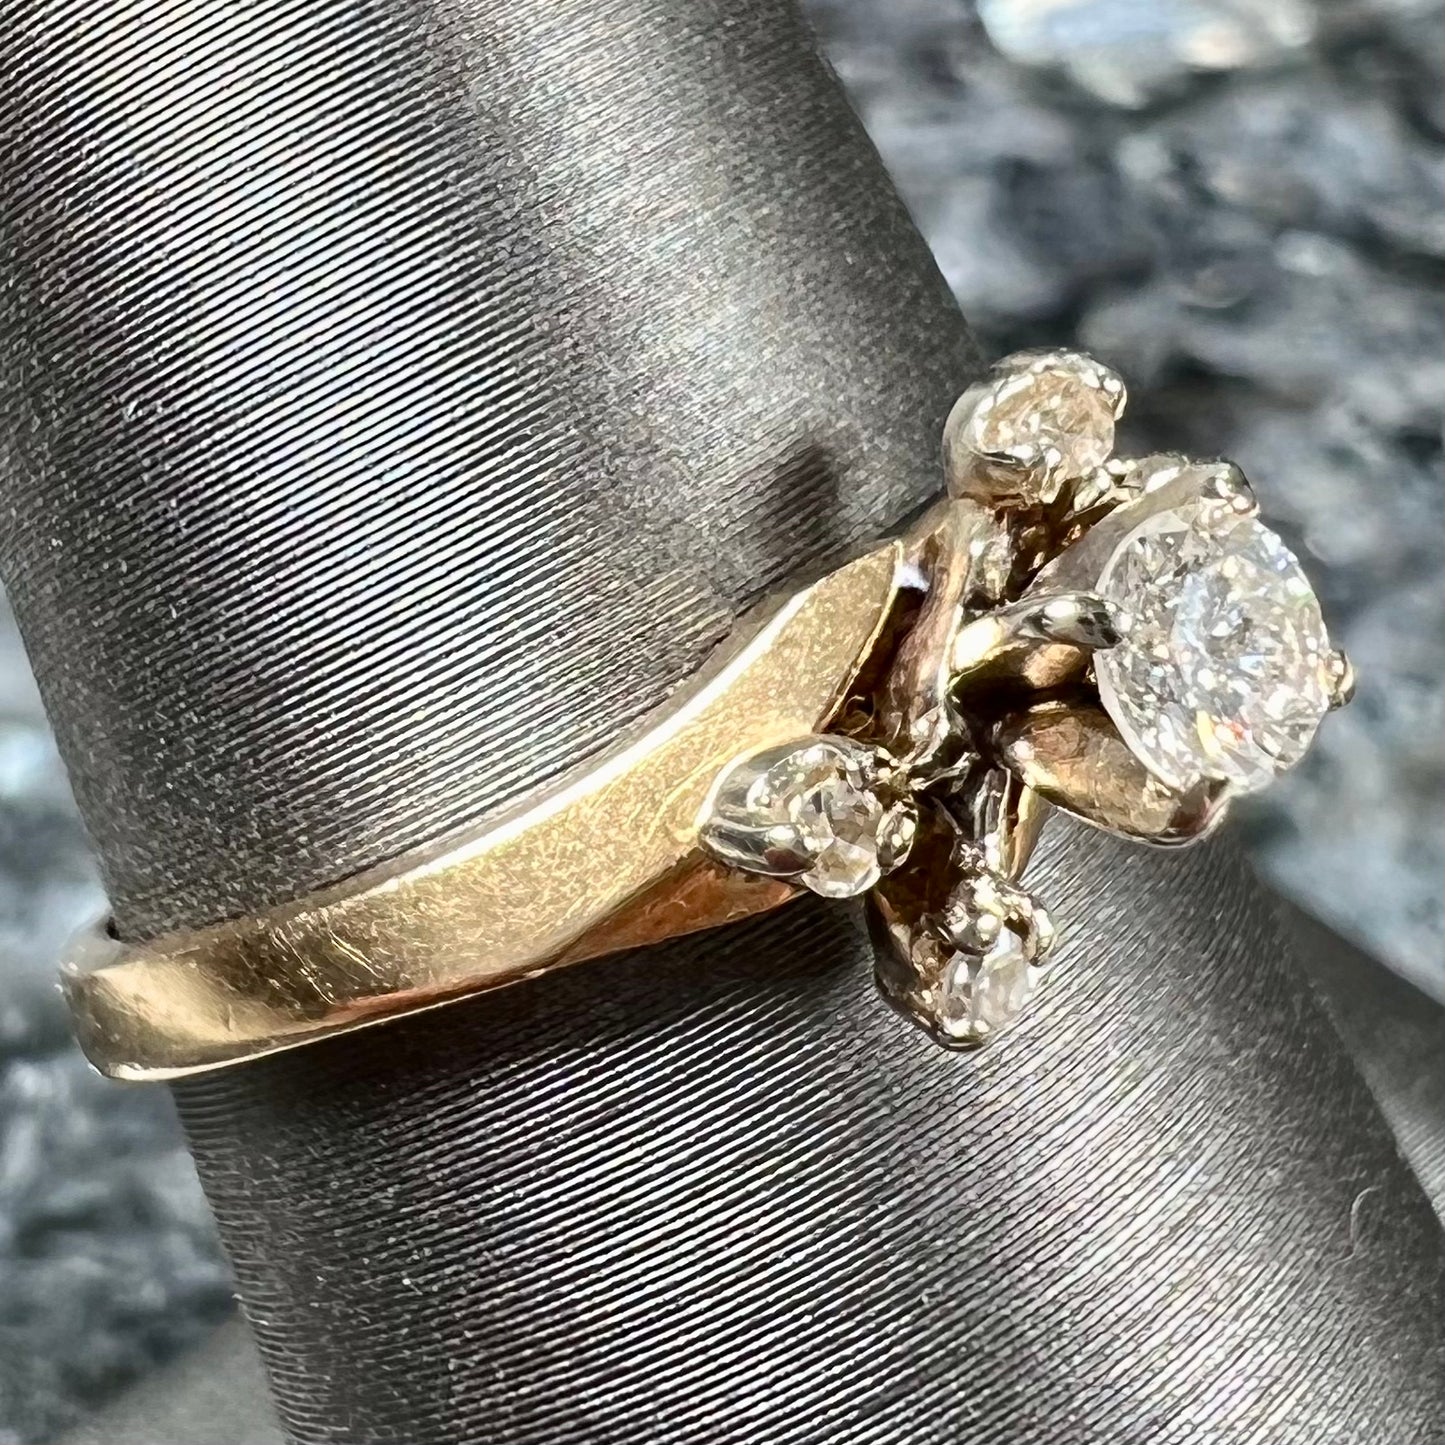 A yellow gold high-set diamond ring with four side diamonds.